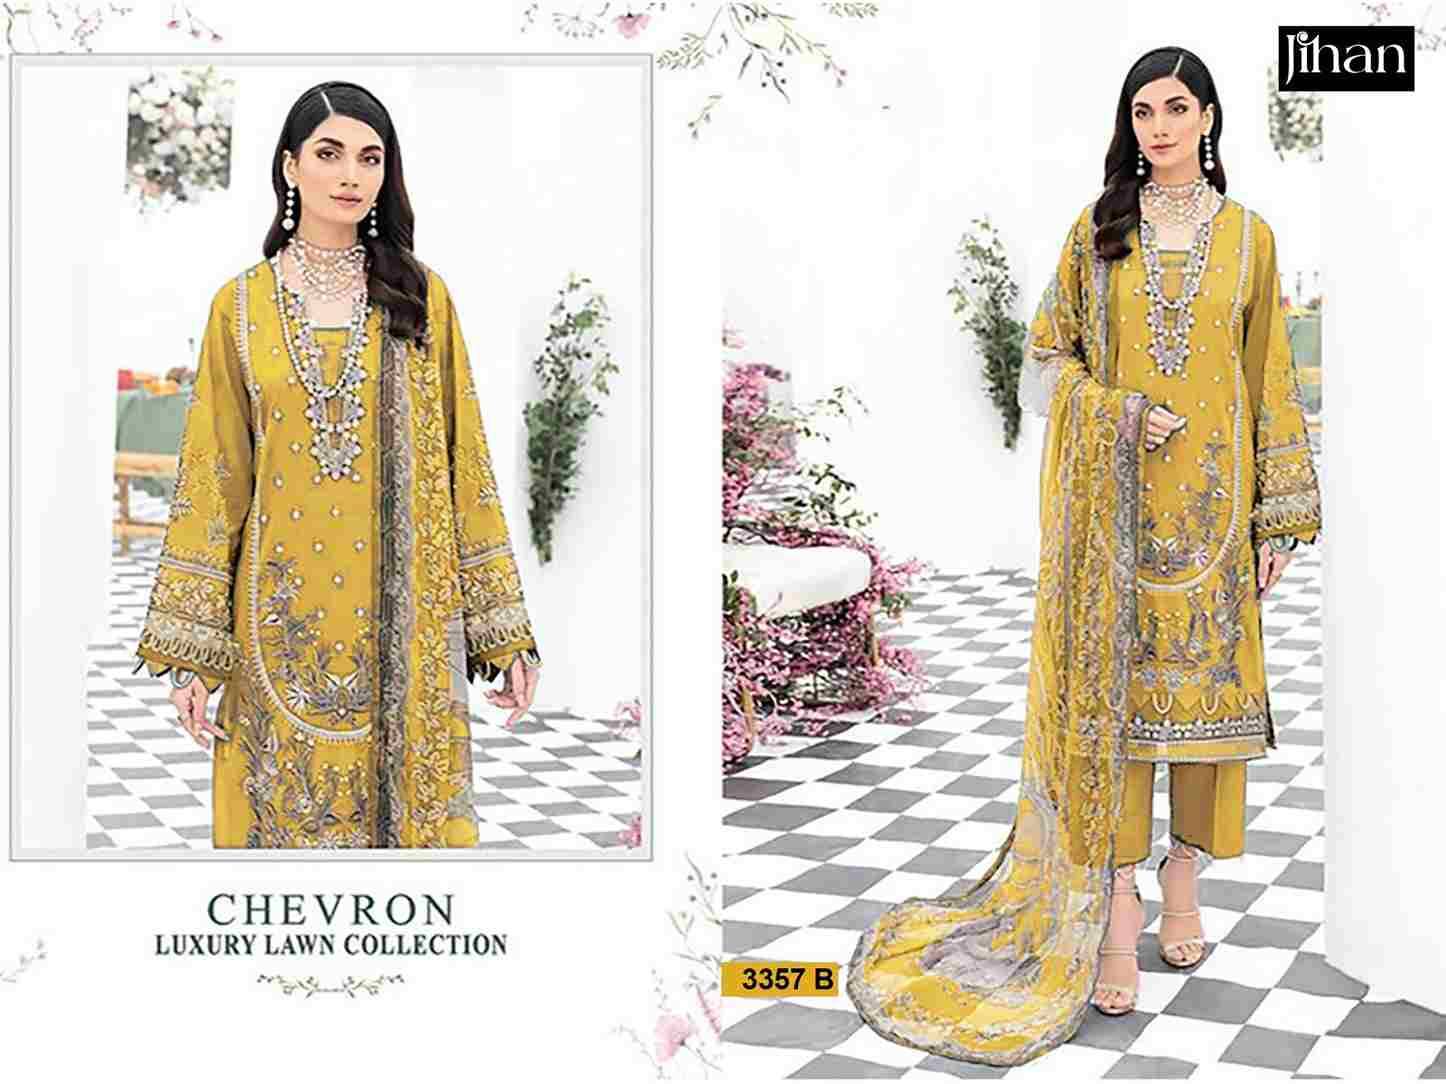 Chevron Luxury Lawn Collection By Jihan 3357 To 3357-B Series Beautiful Pakistani Suits Stylish Fancy Colorful Party Wear & Occasional Wear Pure Lawn Cotton Embroidered Dresses At Wholesale Price